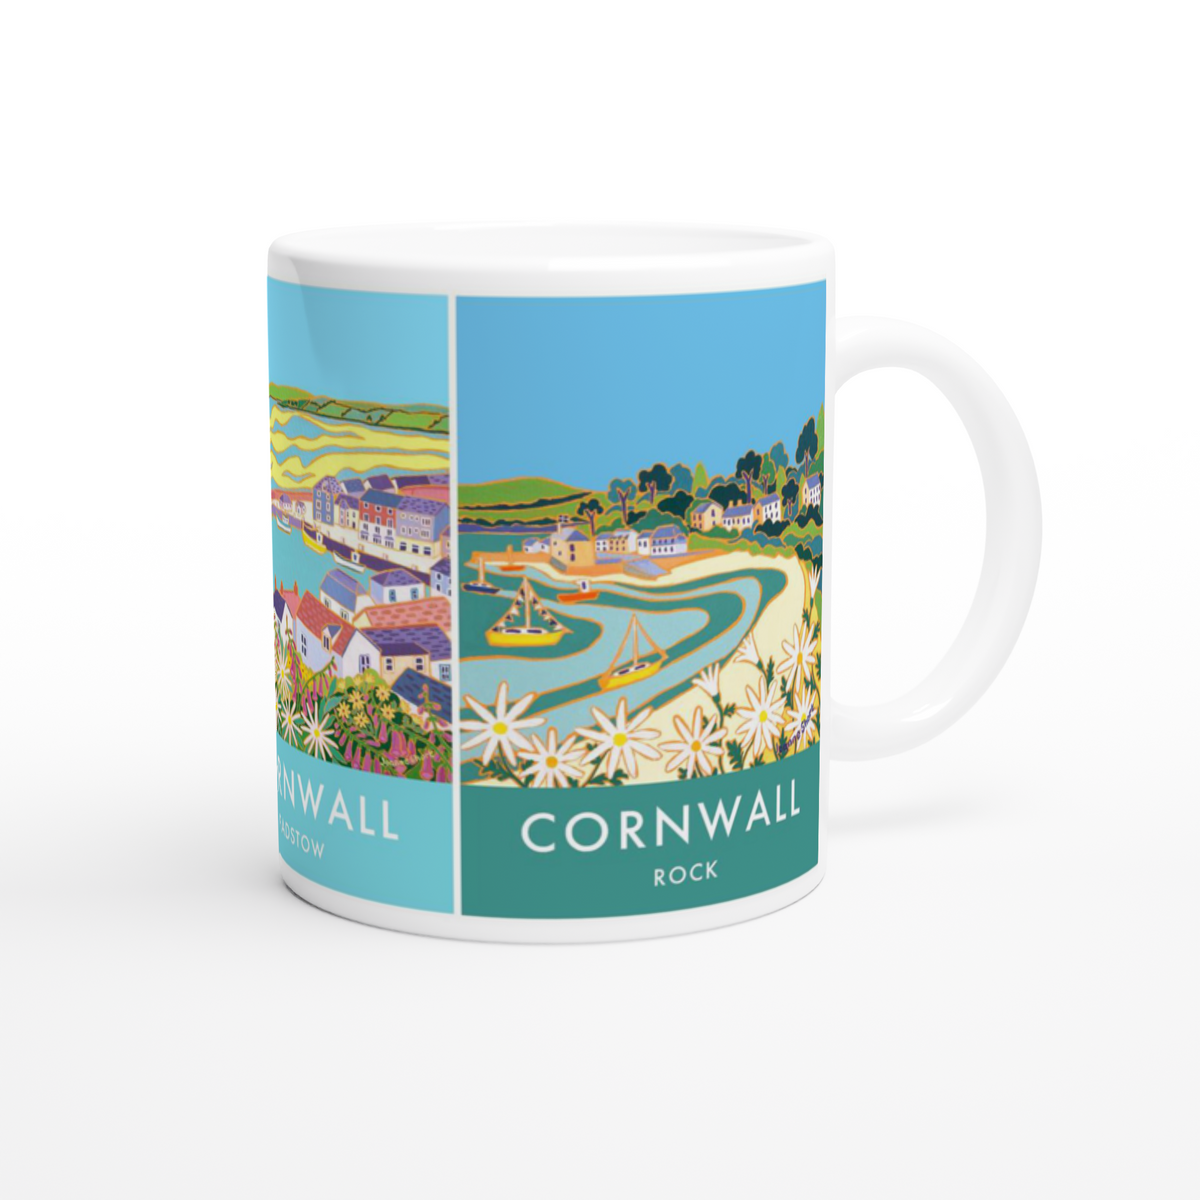 Joanne Short Ceramic Cornish Art Mug featuring Padstow Harbour, Padstow and Rock in Cornwall